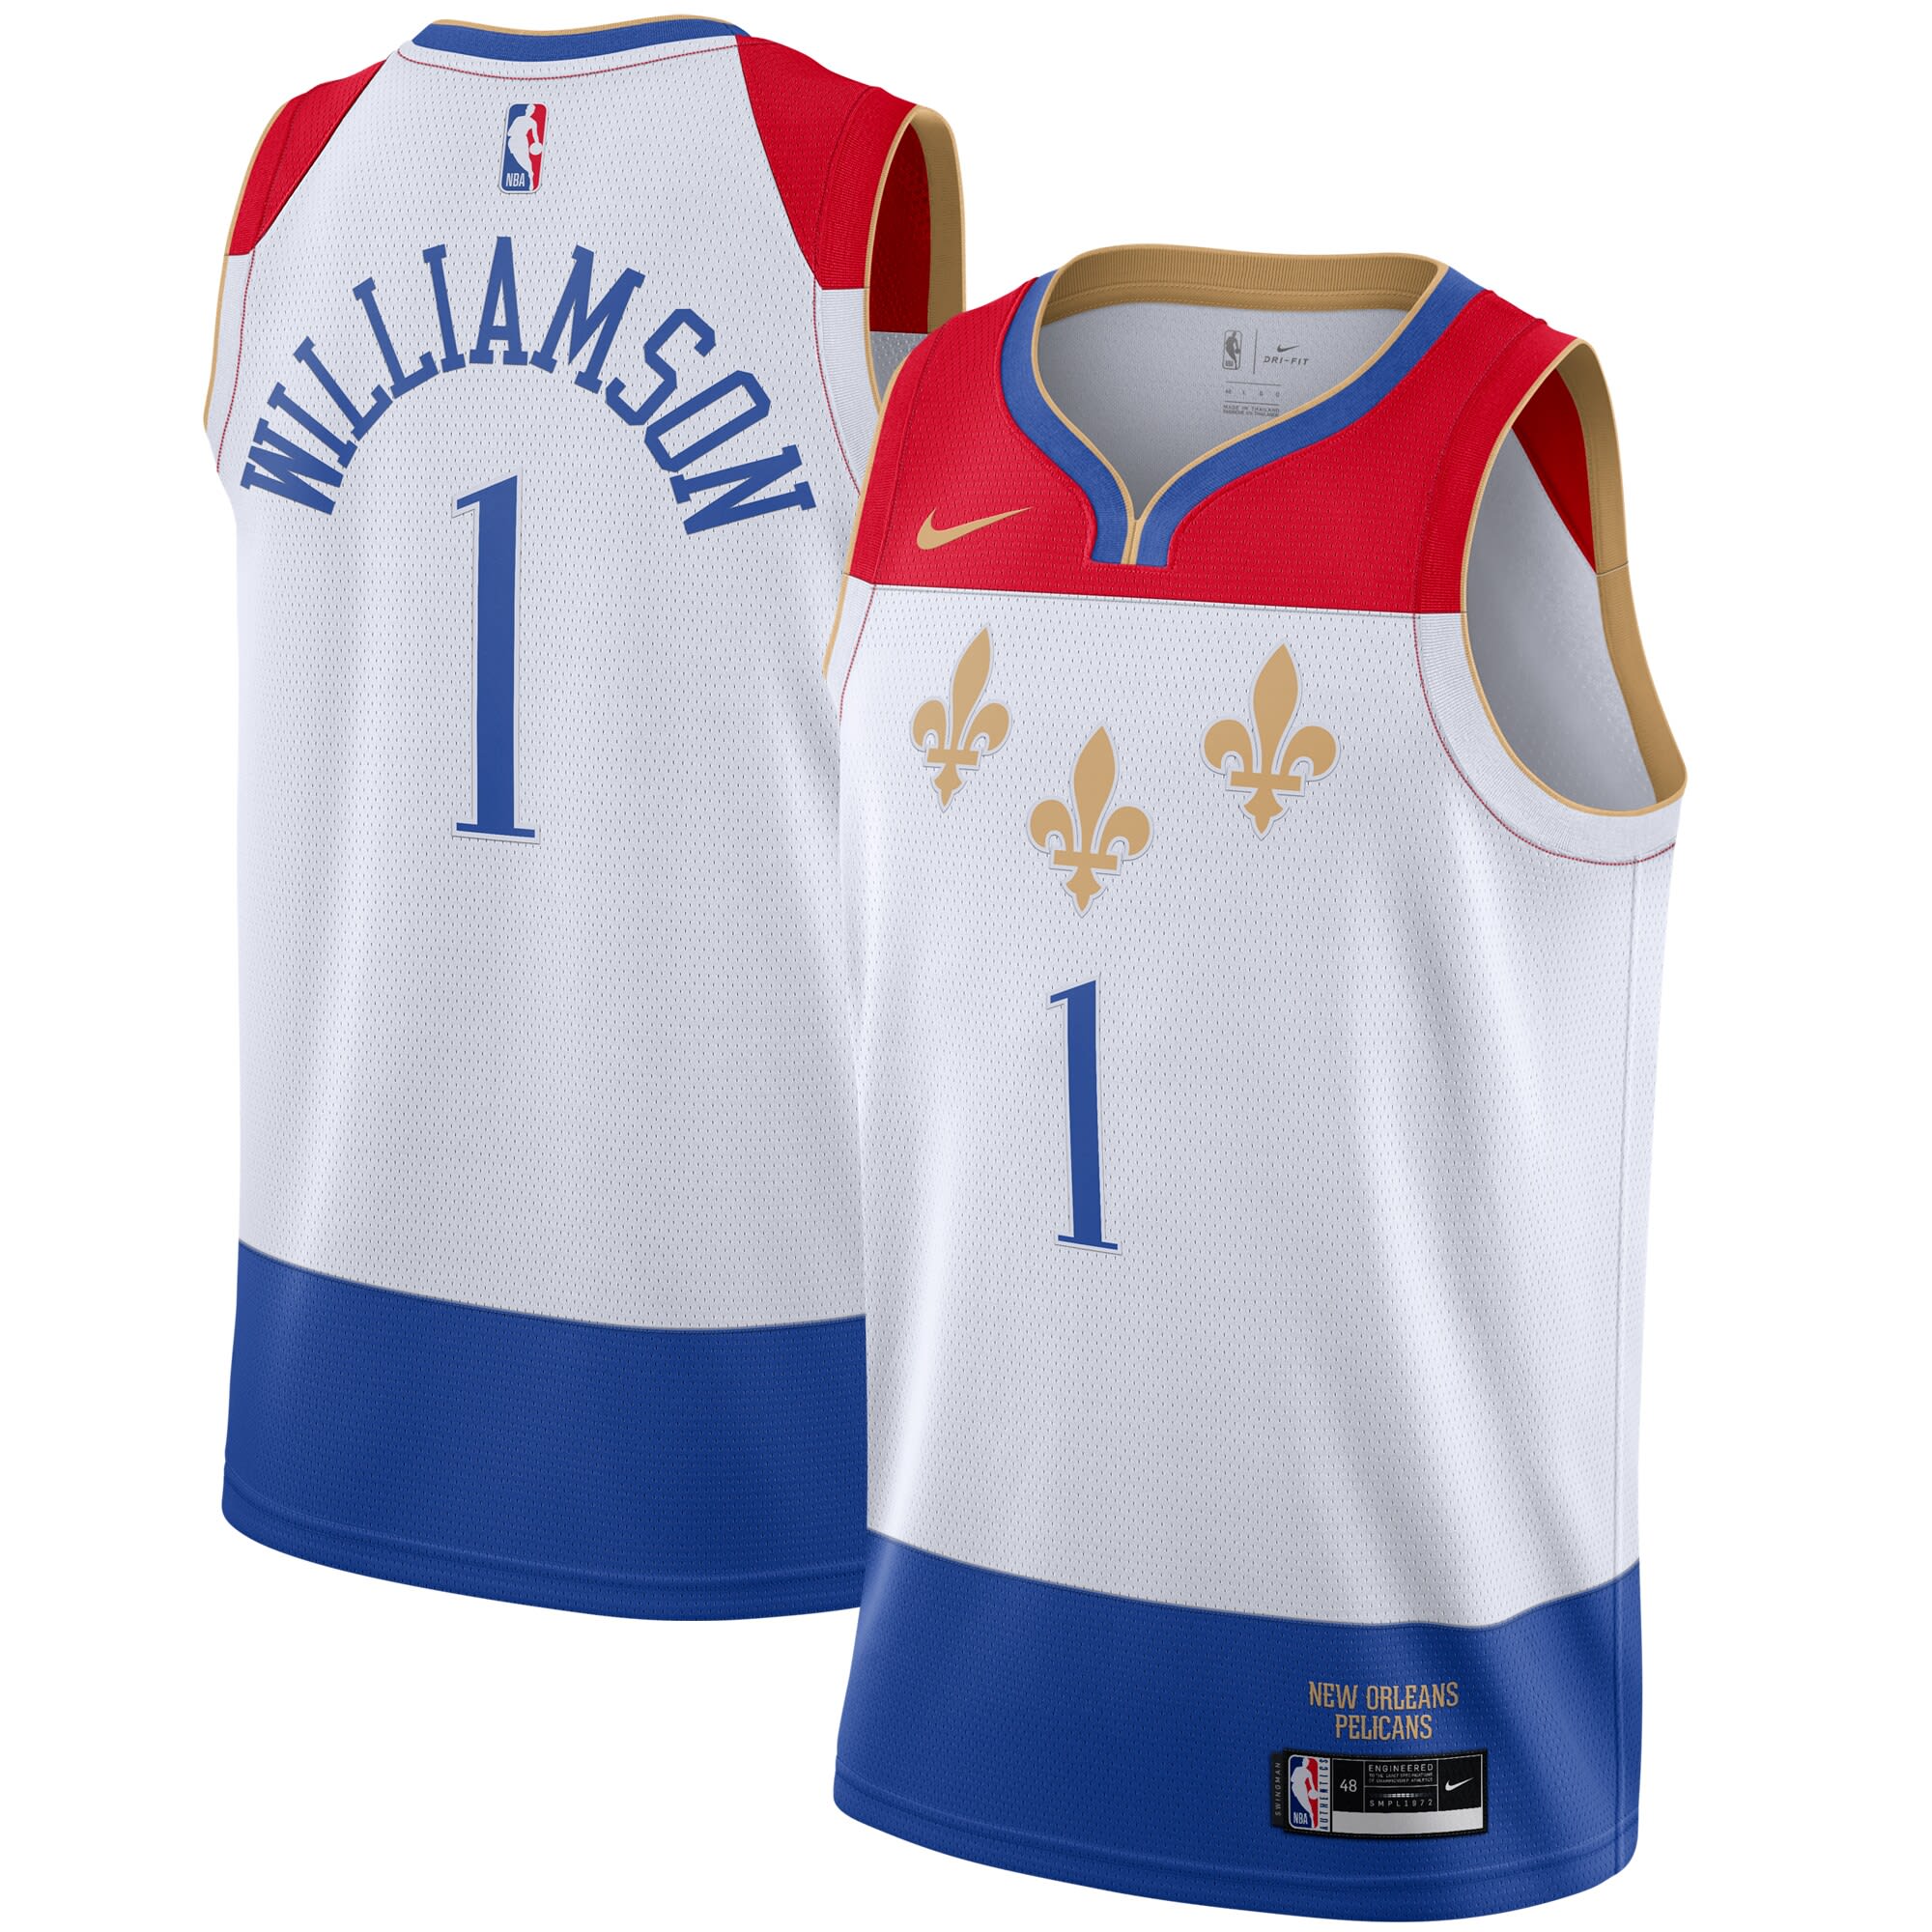 New Orleans Pelicans Ranking the NBA's city edition uniforms